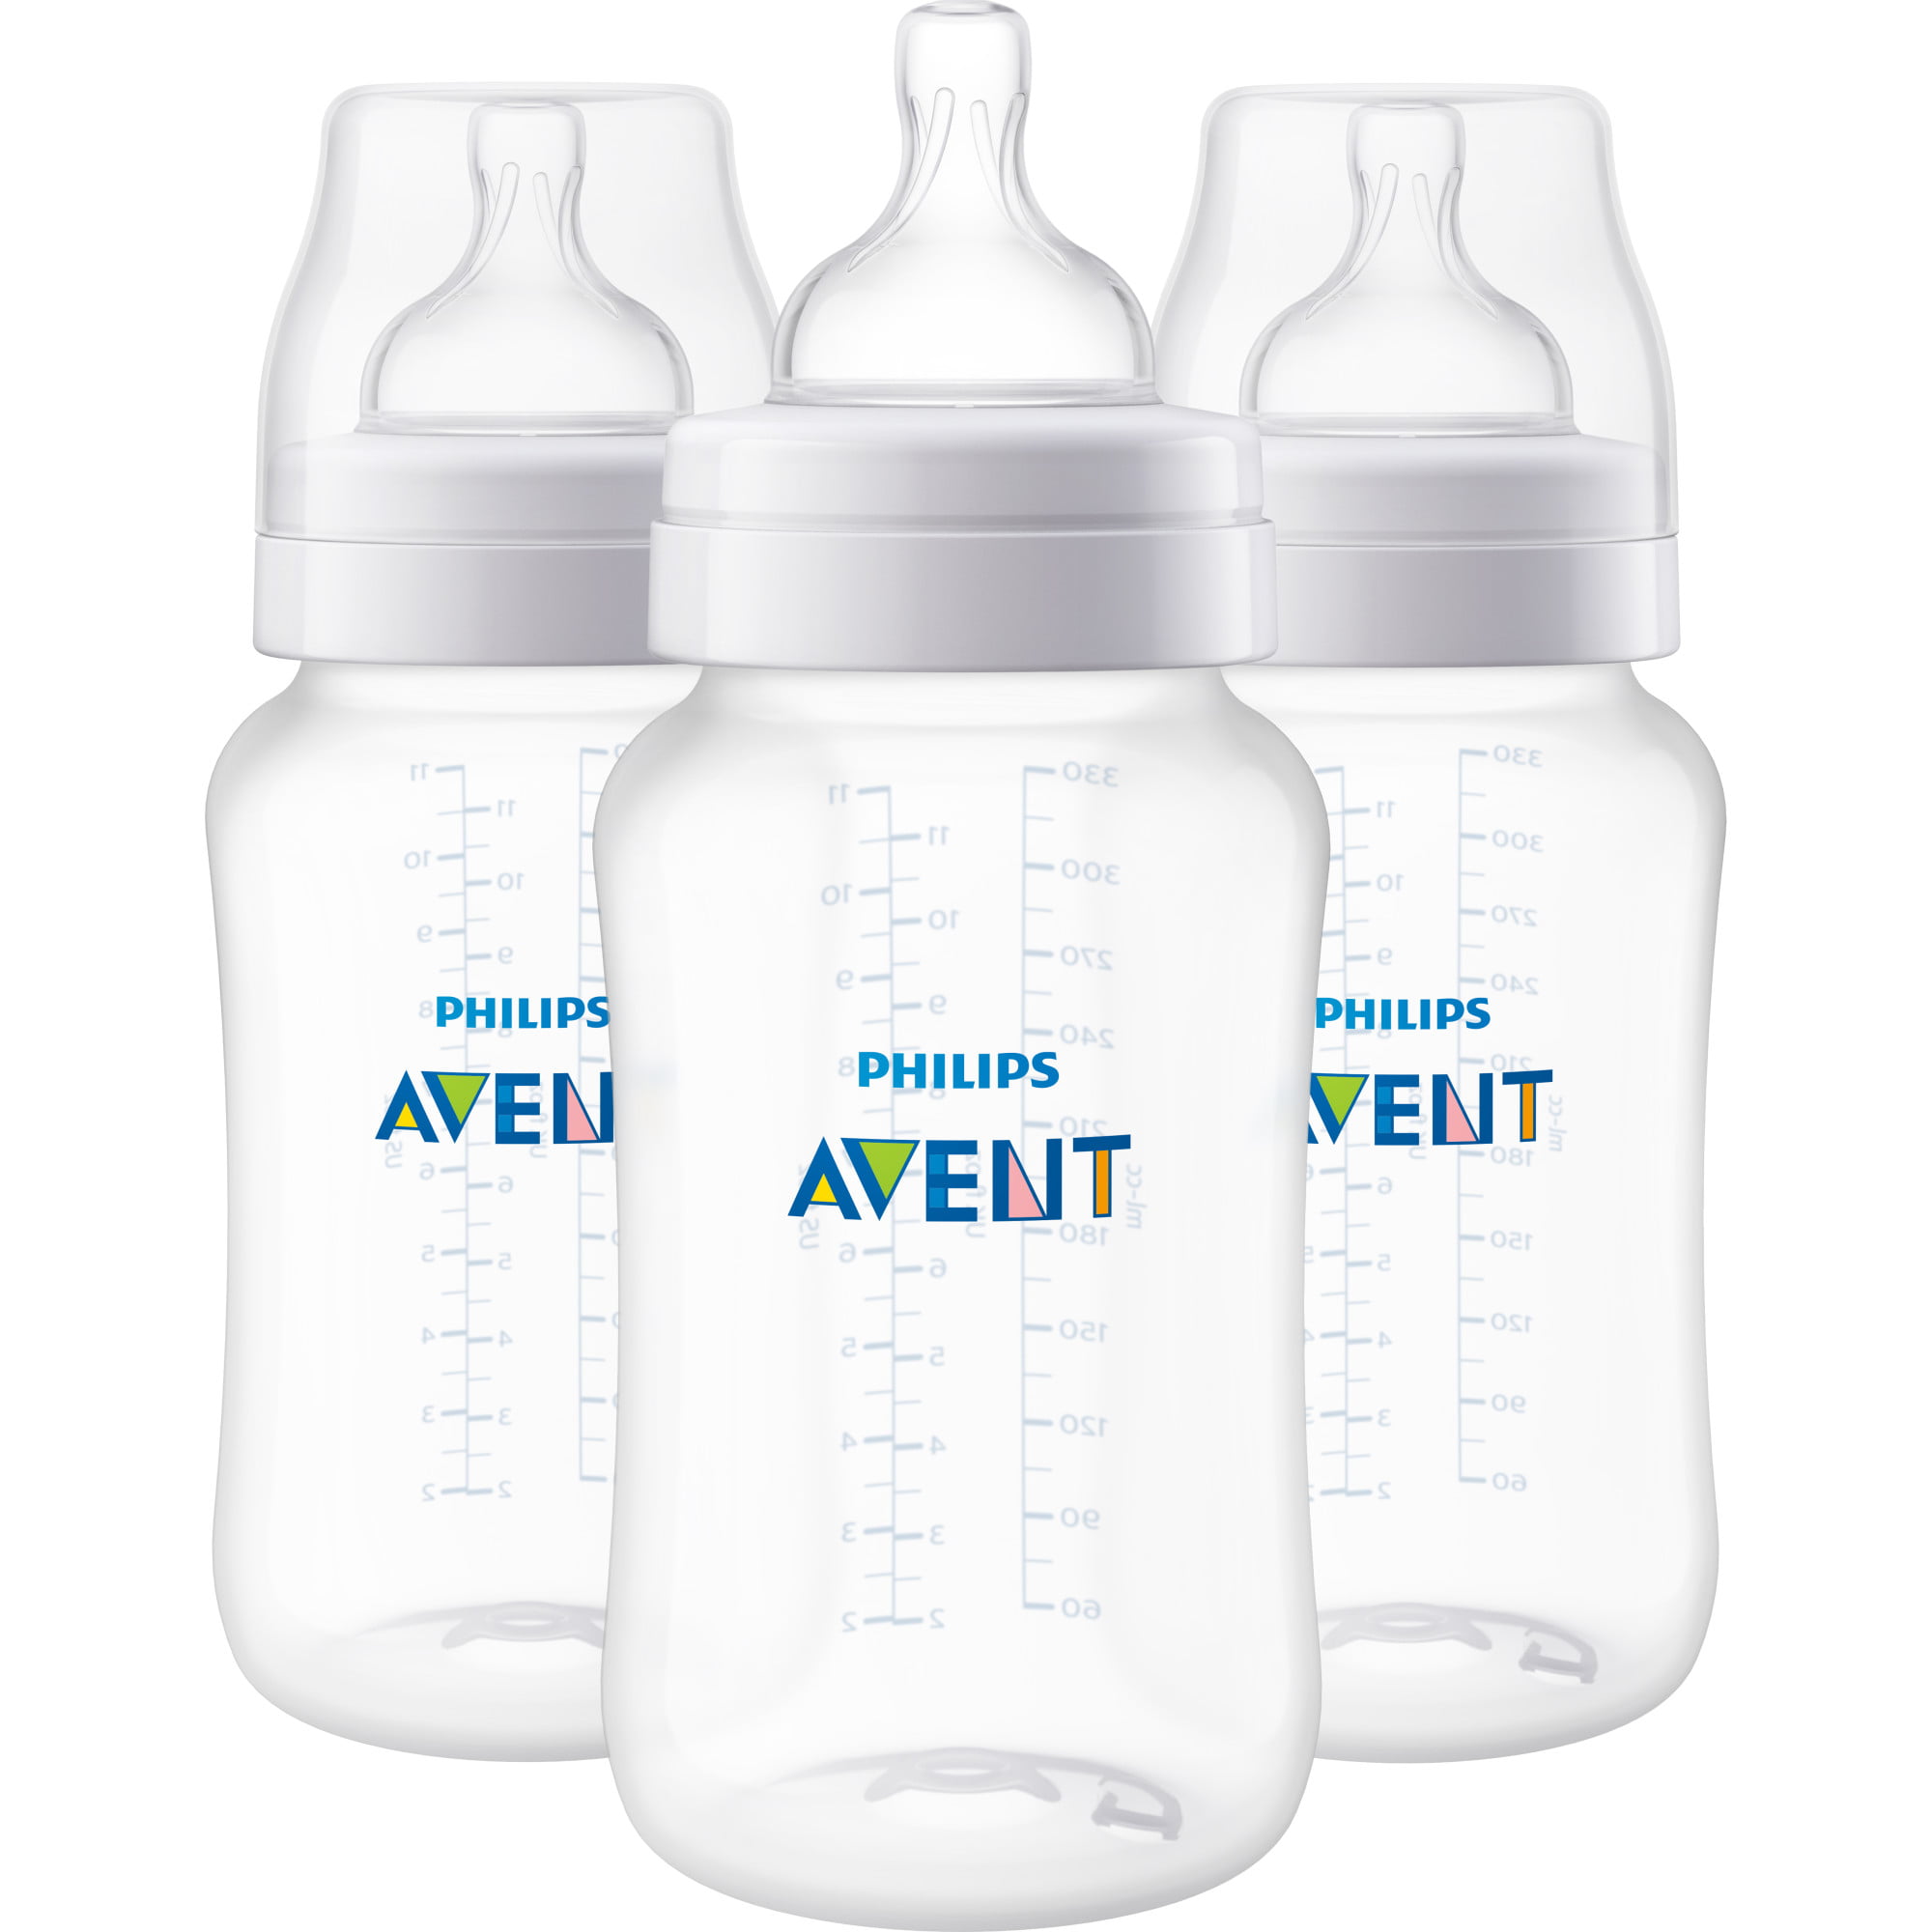 avent products